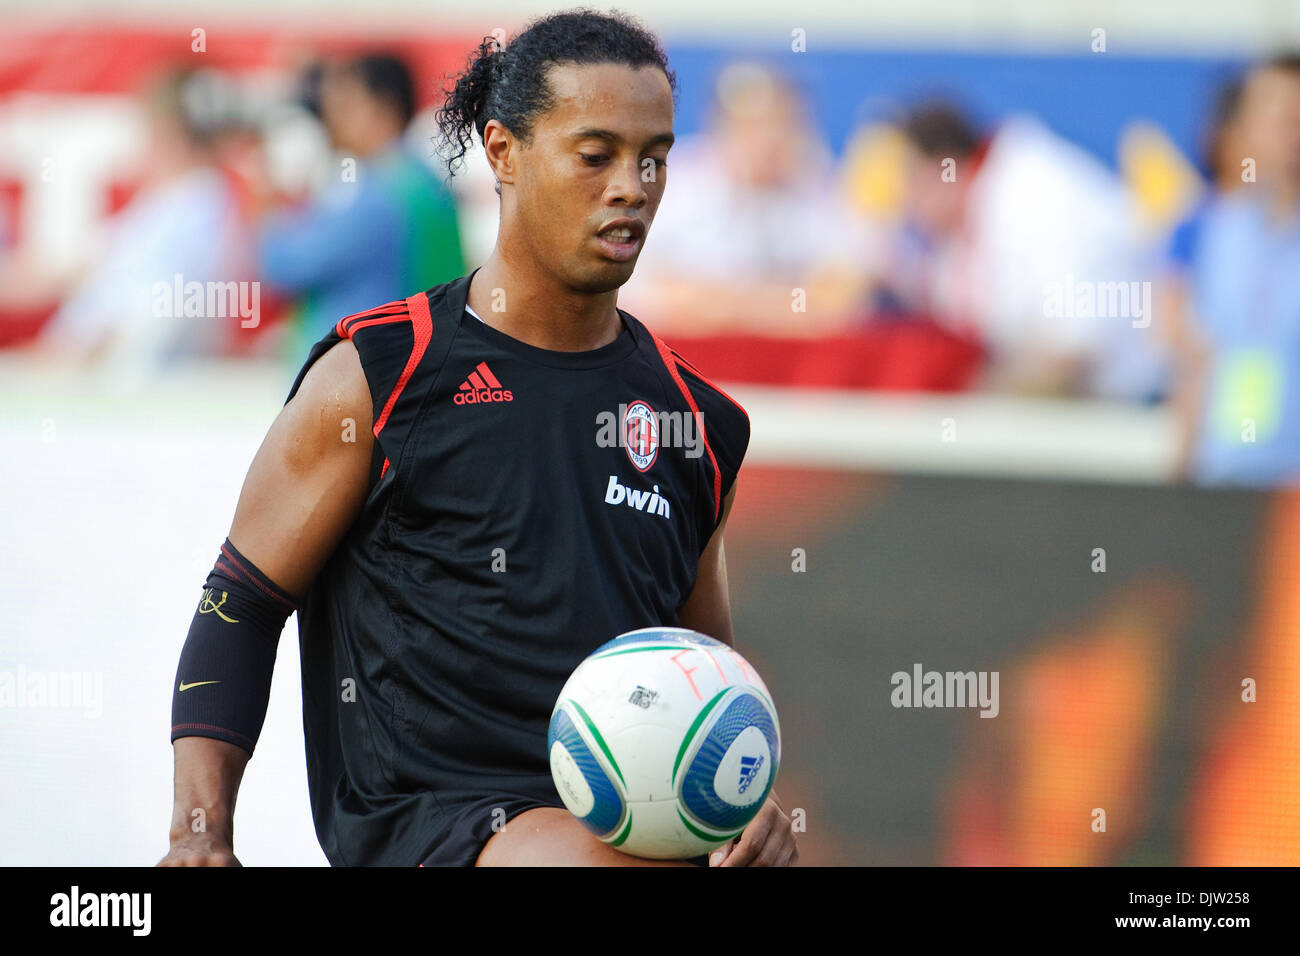 30 May2010:  AC Milan midfielder Ronaldinho (80) warms up prior to the friendly match between the Chicago Fire and AC Milan at Toyota Park in Bridgeview, Illinois.  AC Milan defeated the Fire 1-0. (Credit Image: © John Rowland/Southcreek Global/ZUMApress.com) Stock Photo